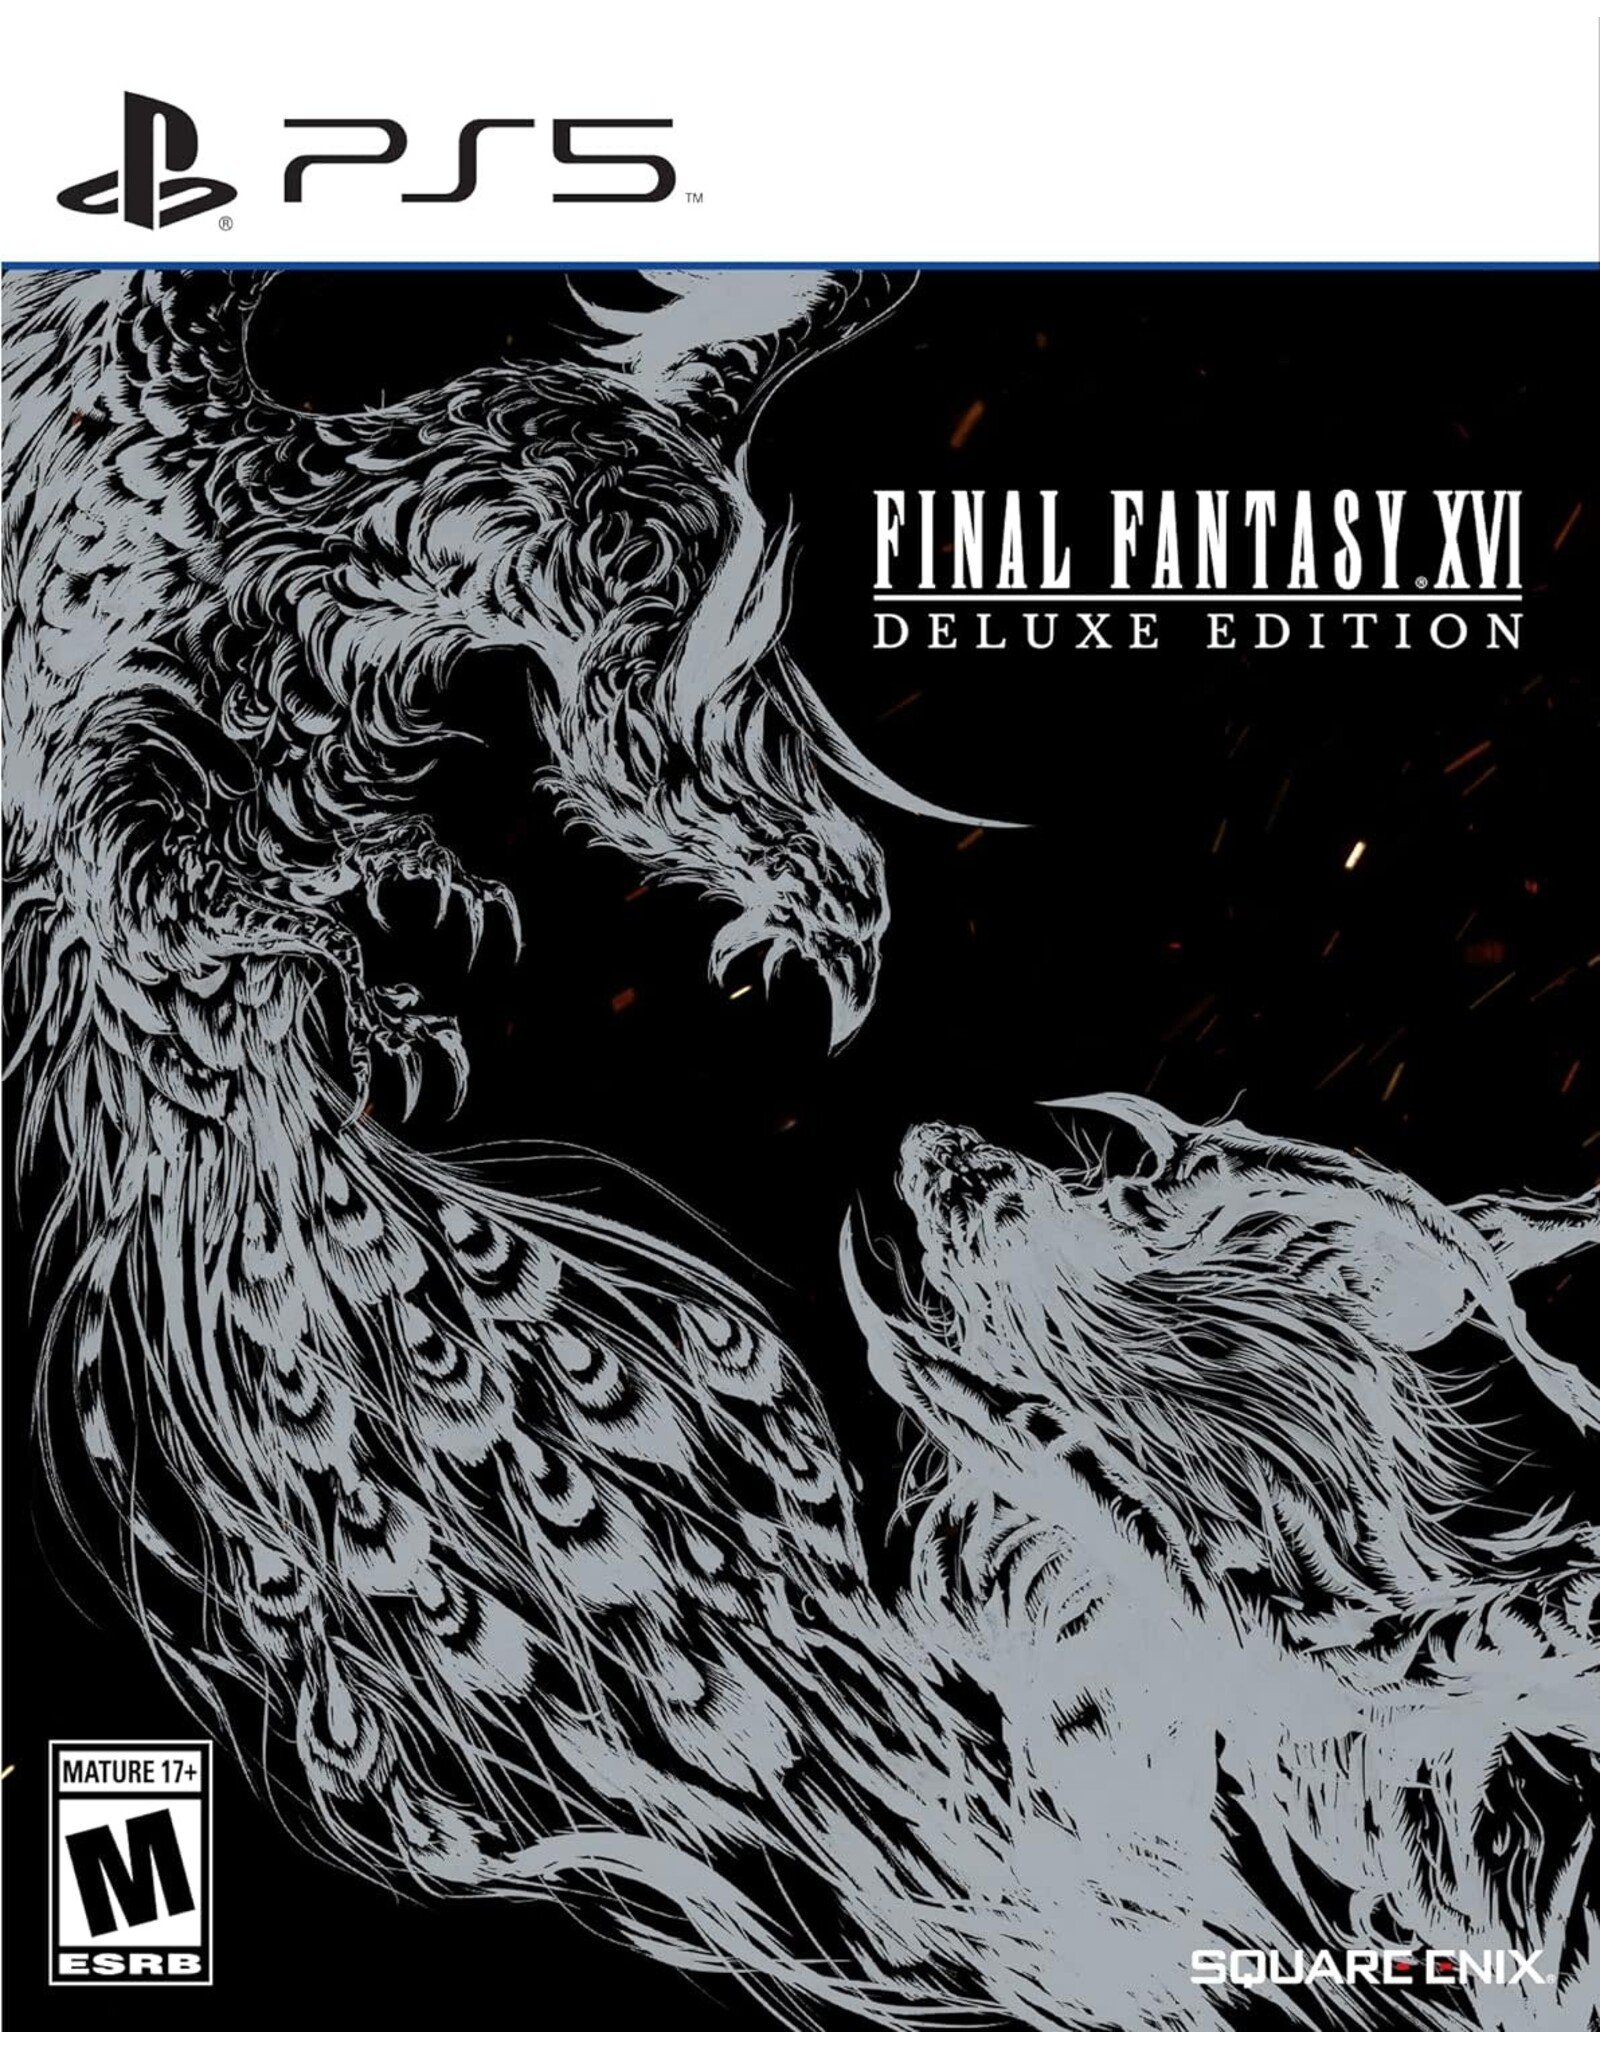 Playstation 5 Final Fantasy XVI Deluxe Edition with Gamestop Preoder Patches (CiB)